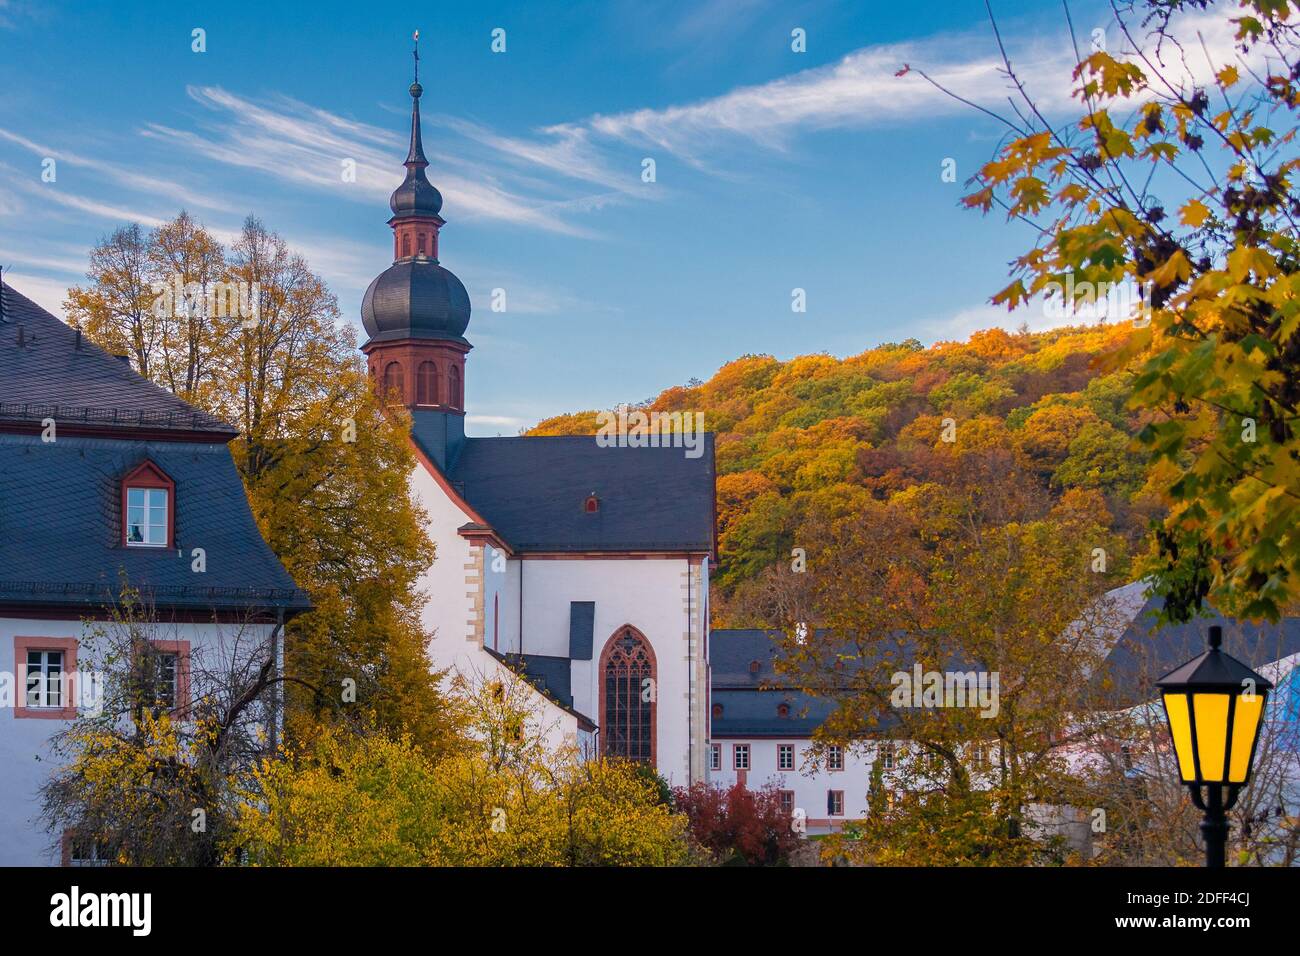 Kloster Eberbach Germany in autumn 2020 Stock Photo